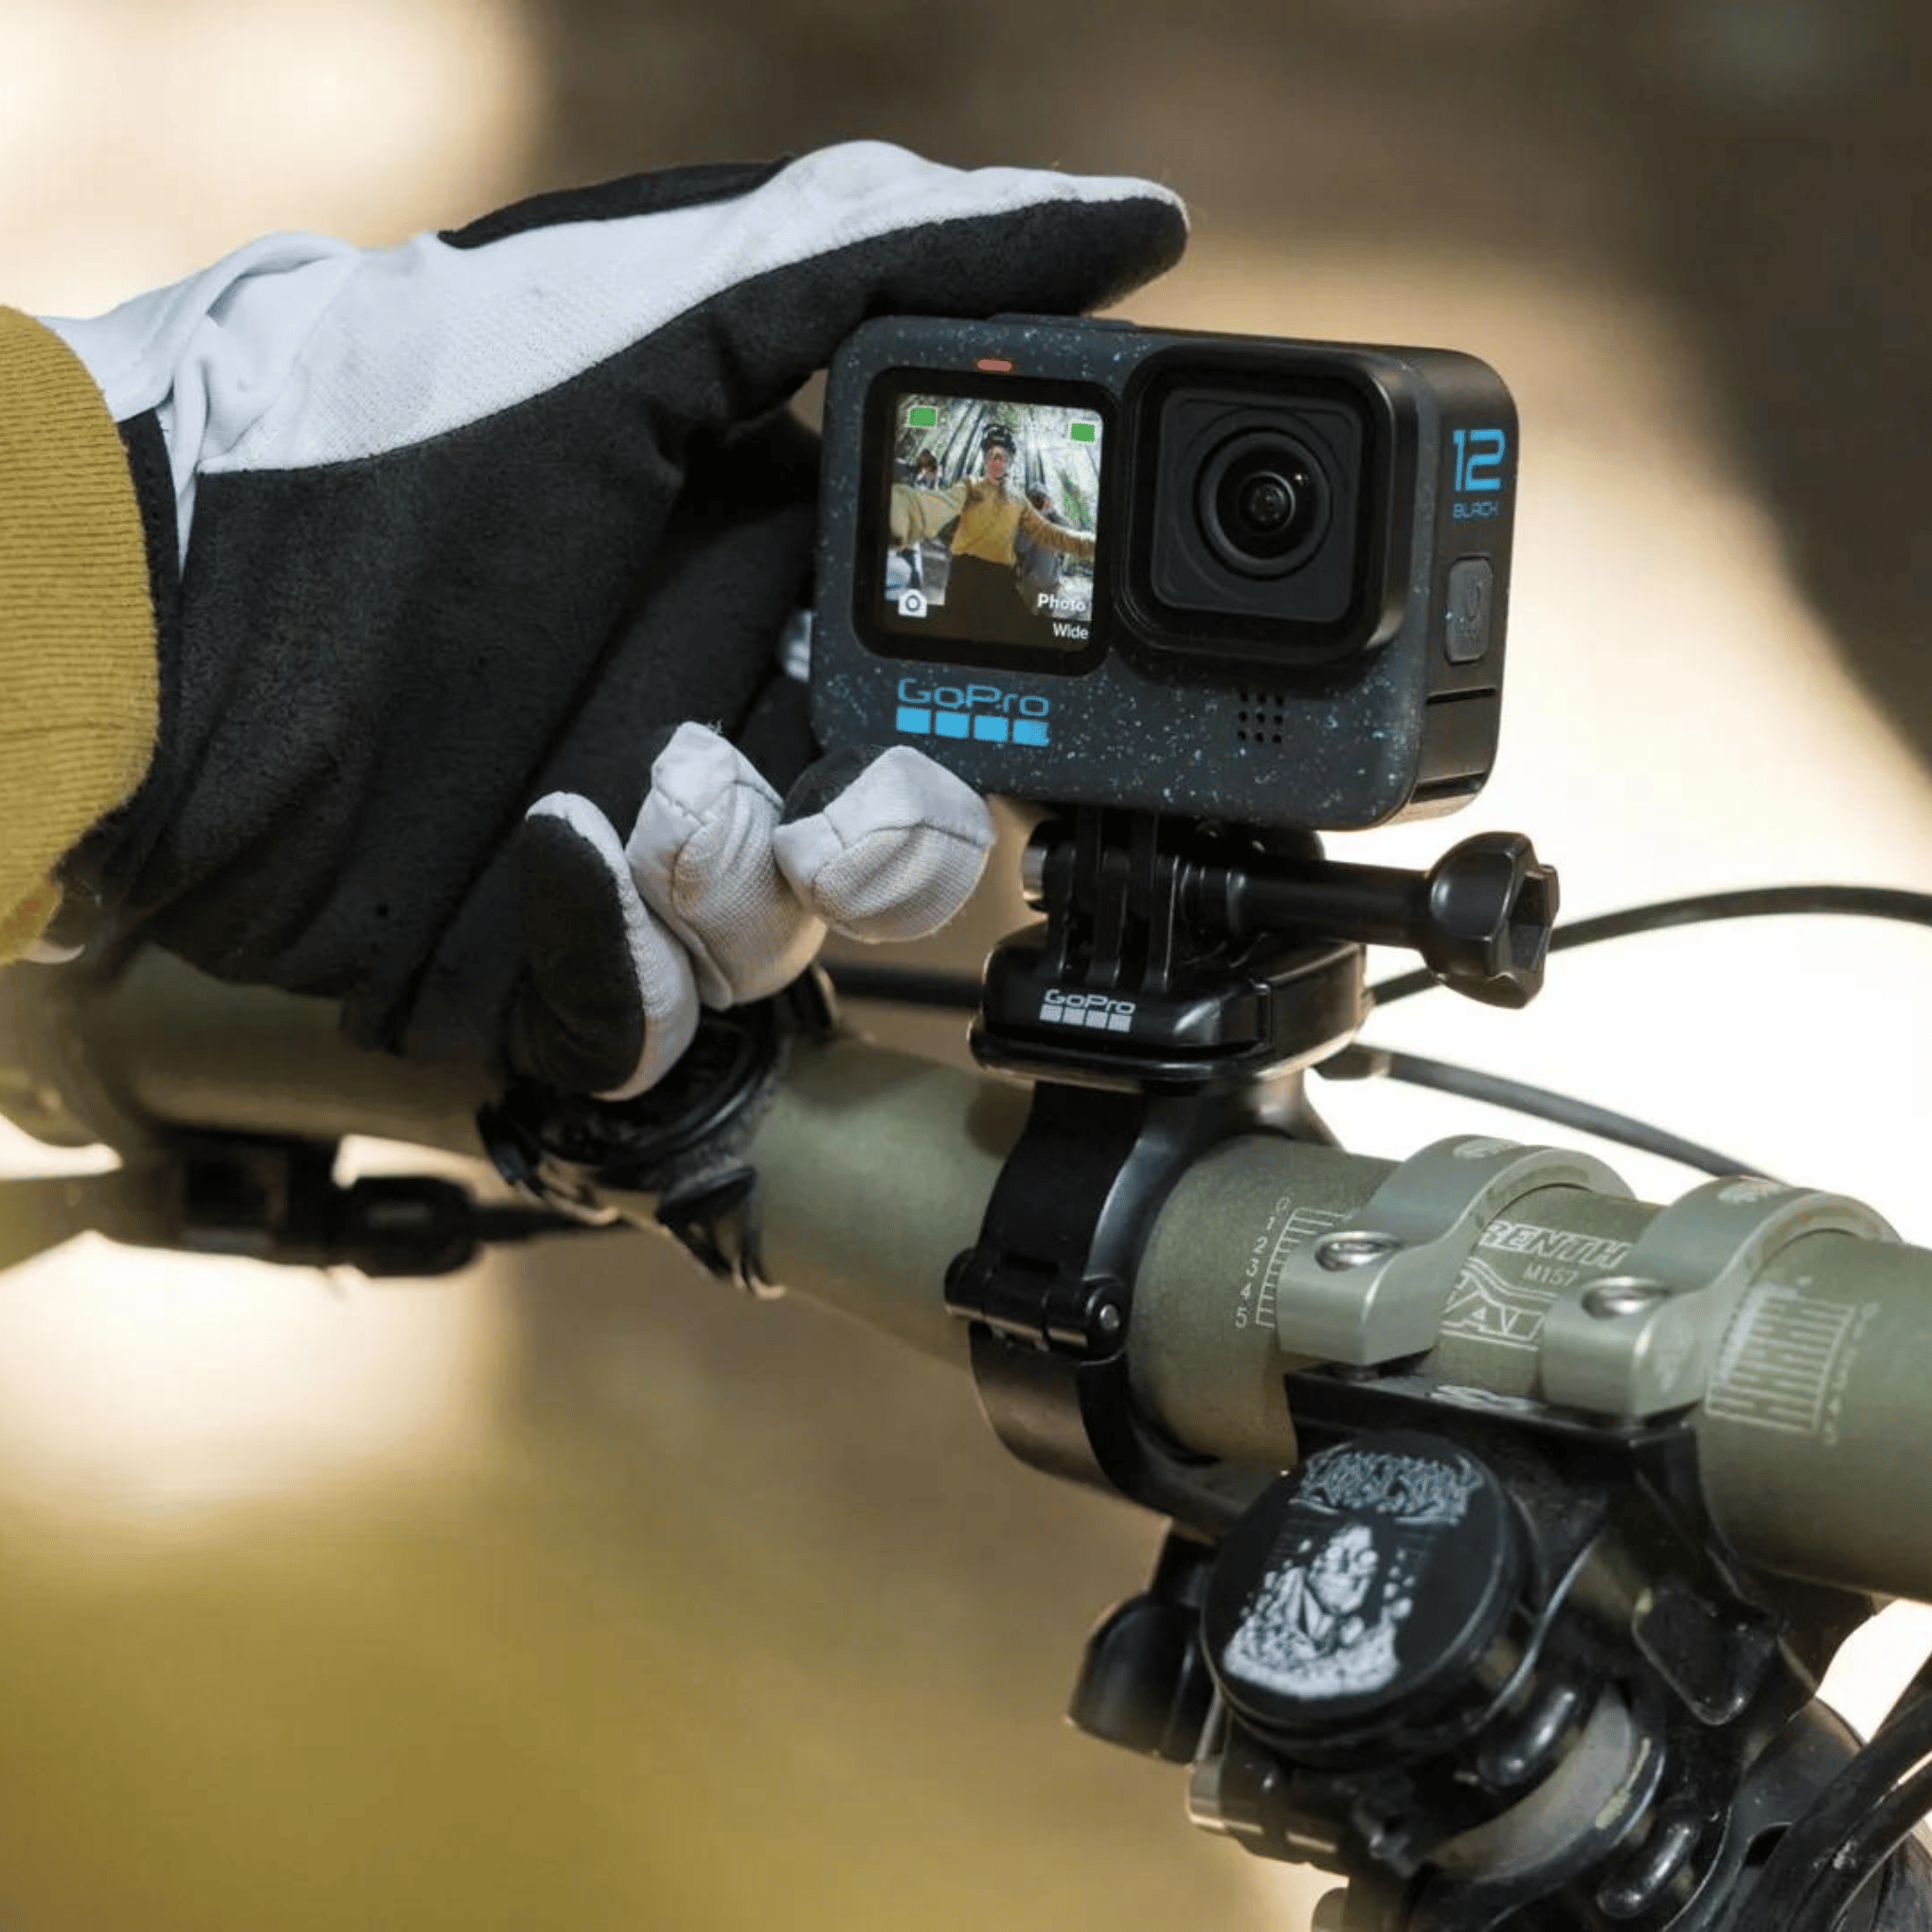 GoPro HERO12 Black Review: The Action Camera